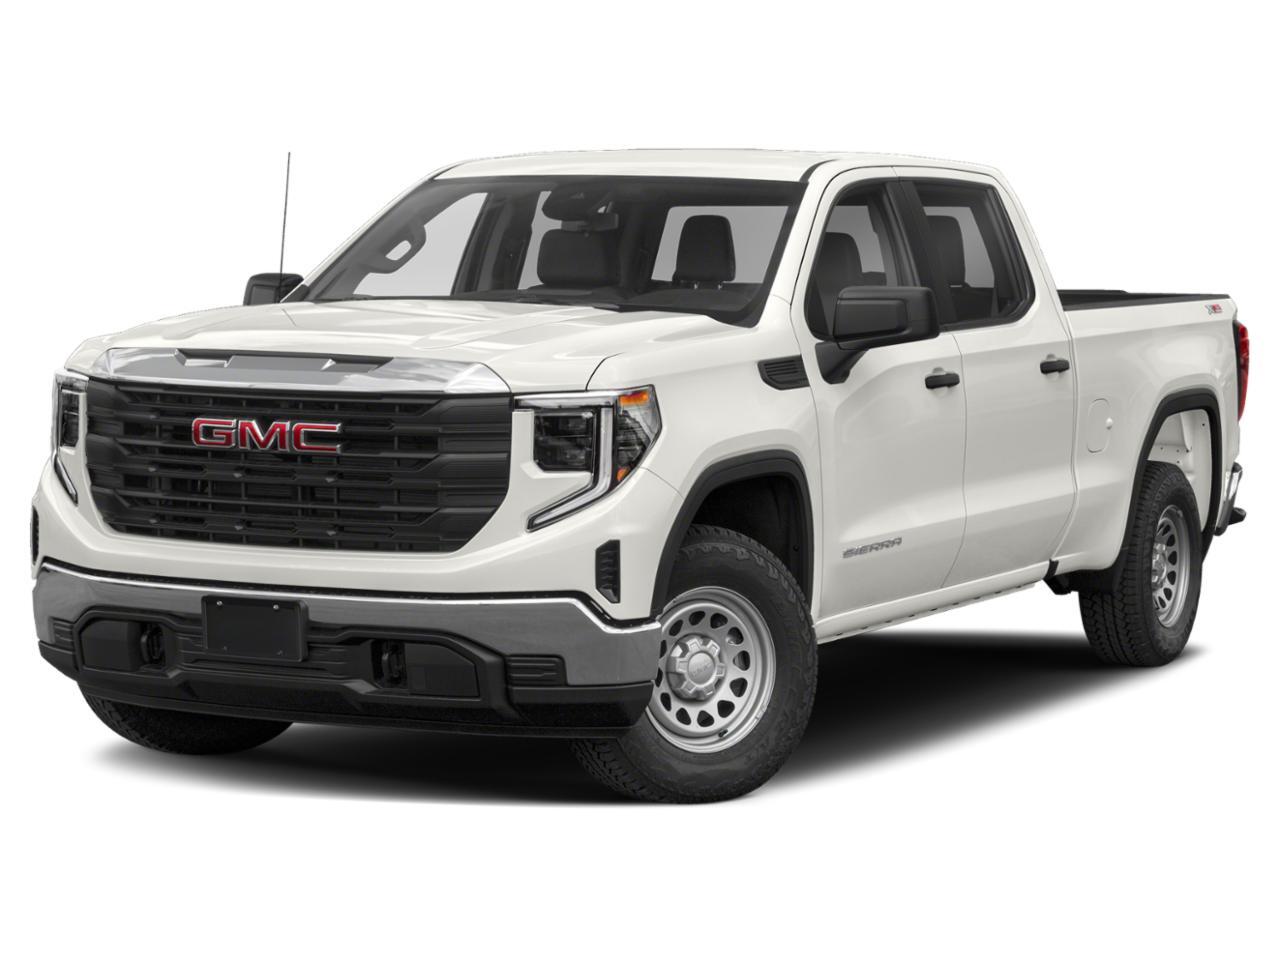 2024 GMC Sierra 1500 4WD CREW 147 Just Arrived + More Photos Coming Soo